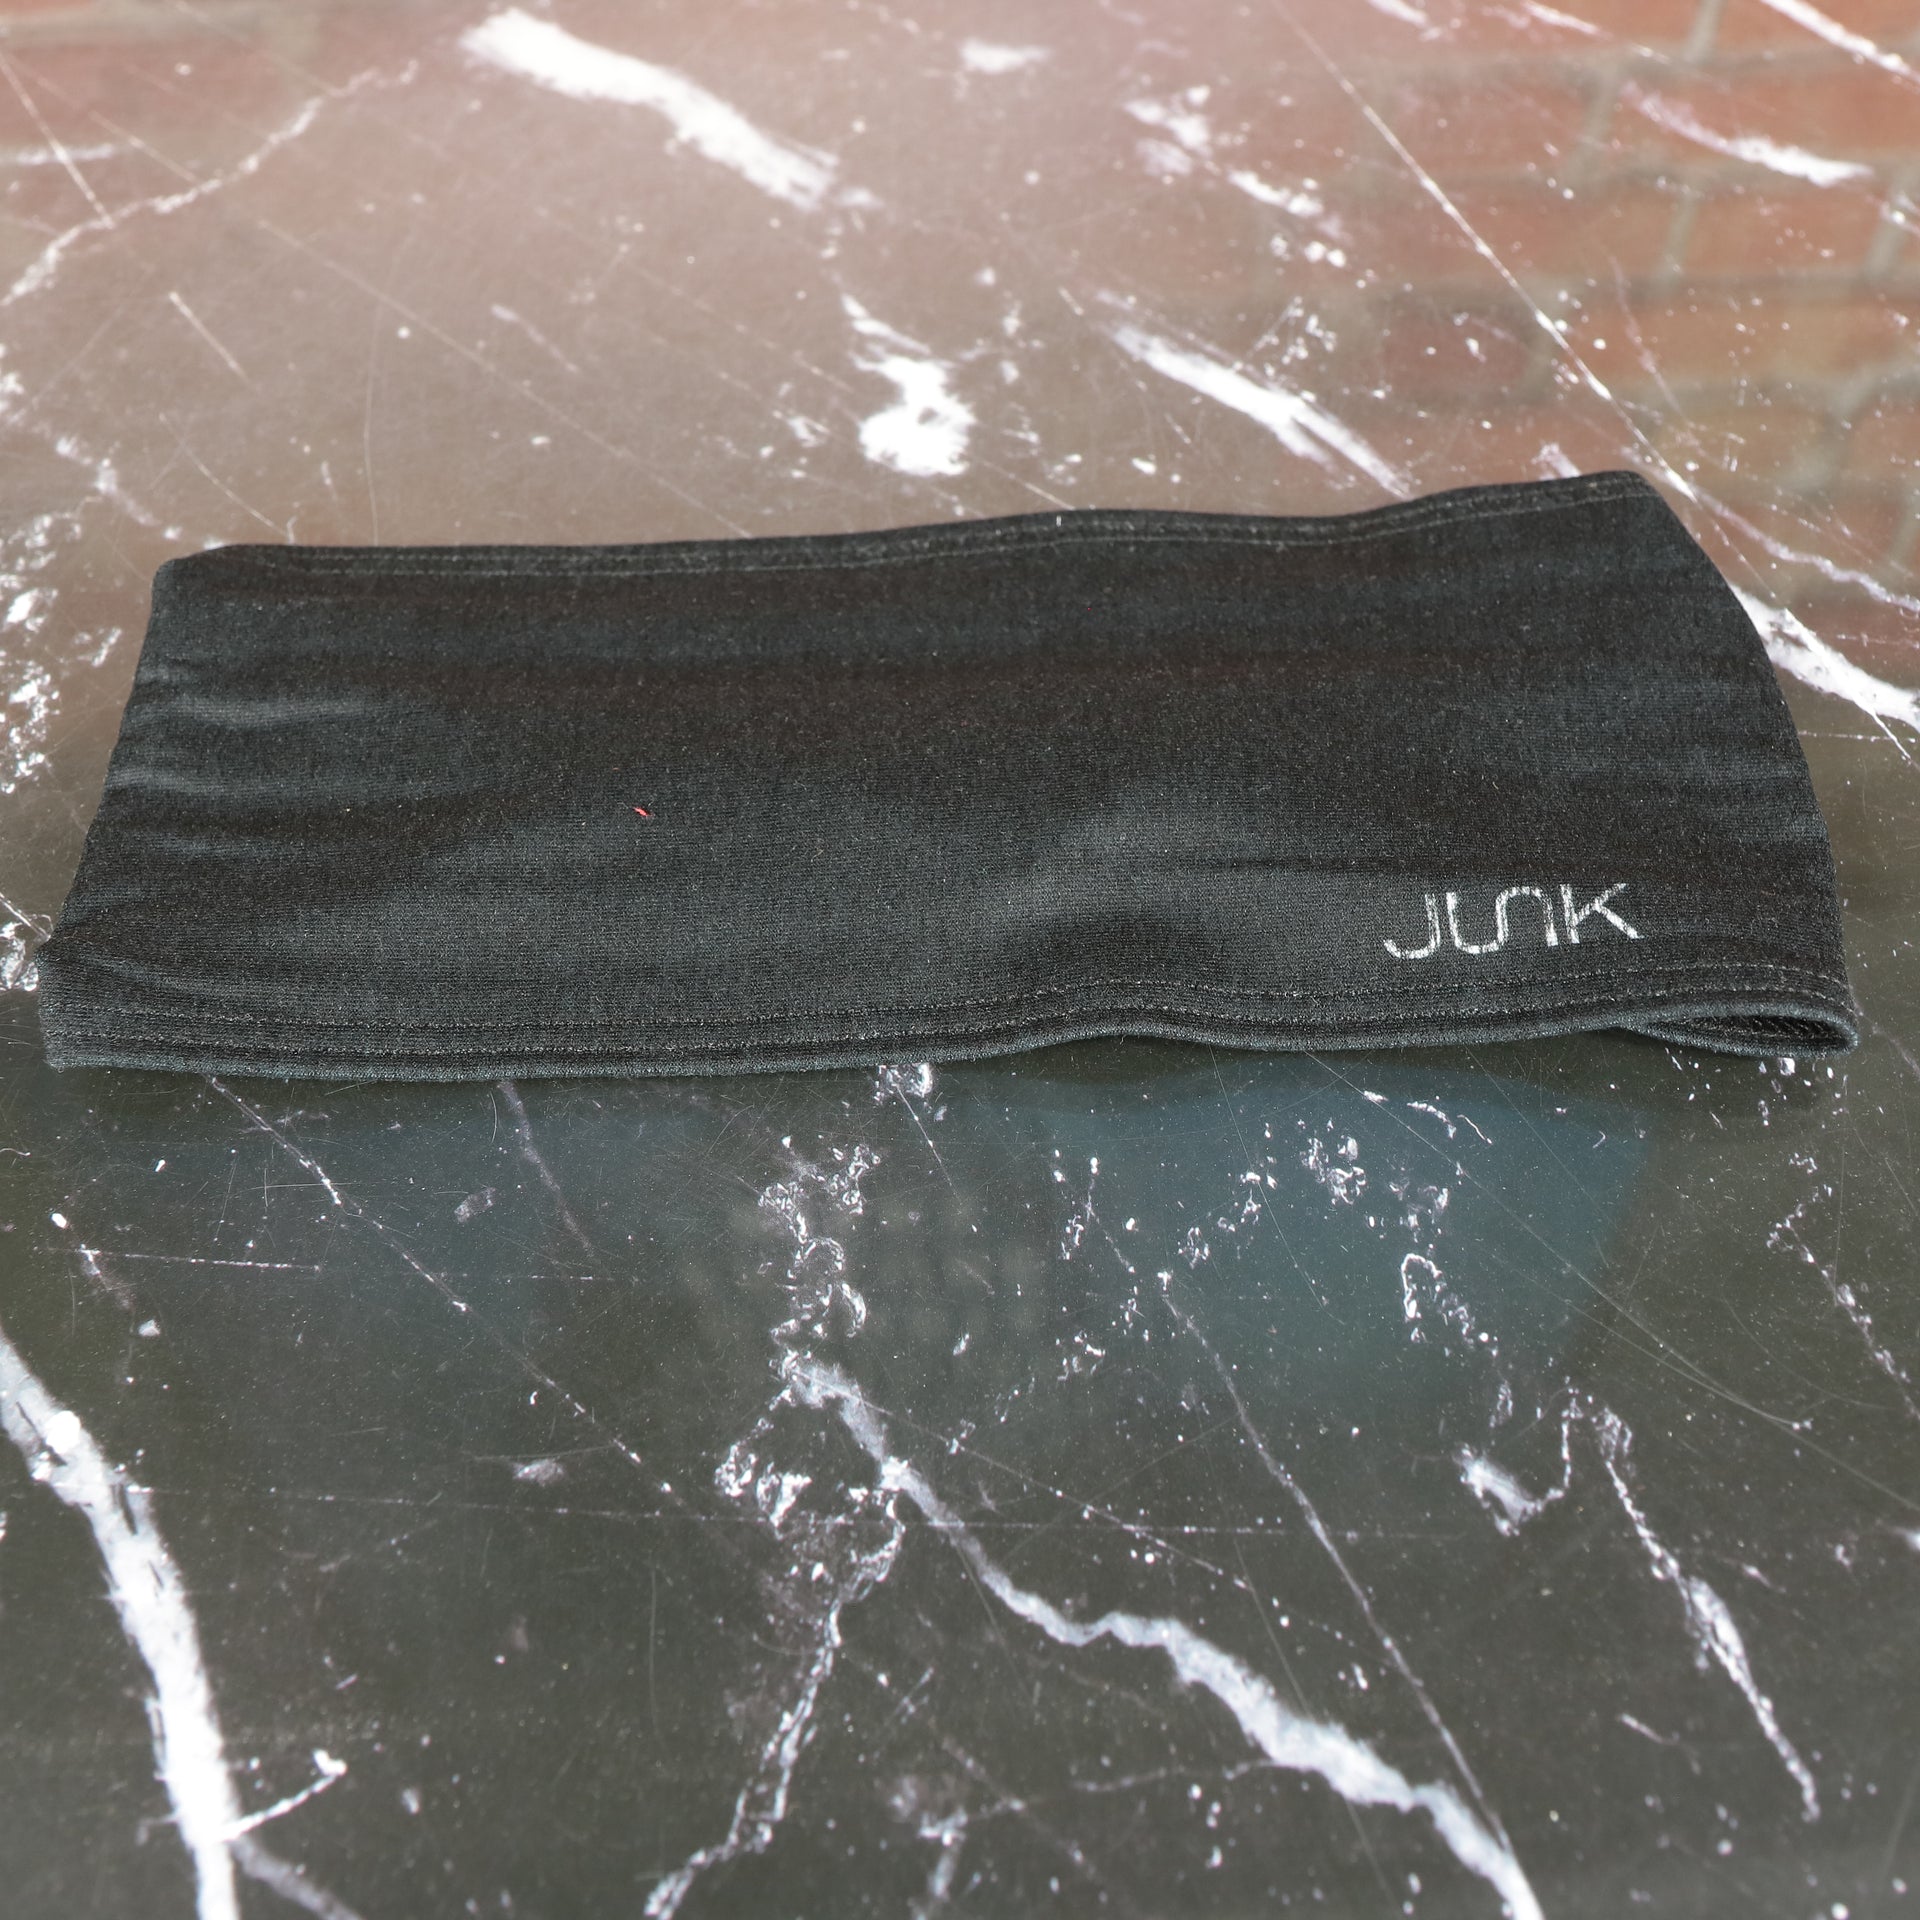 Moisture Wicking UPF 50+ Tactical Black Headband | Officially Licensed Junk Brands